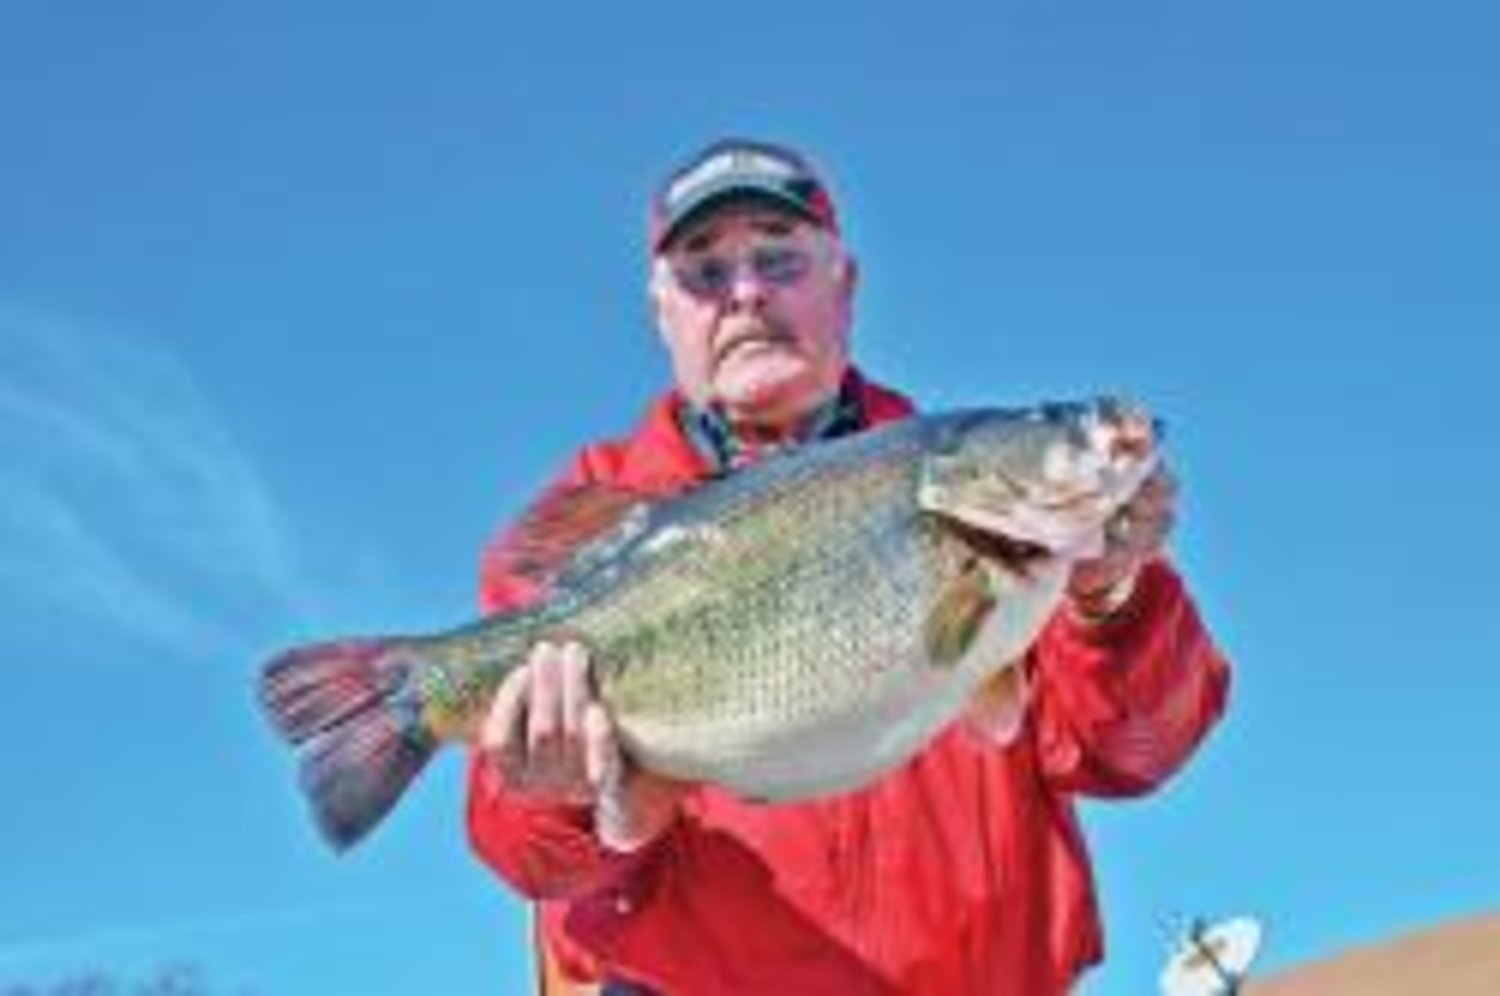 Richard Scibek of Granbury caught Toyota ShareLunker 540 from Lake Fork February 2. The fish weighed 16.04 pounds and was 25.75 inches long and 23 inches in girth.